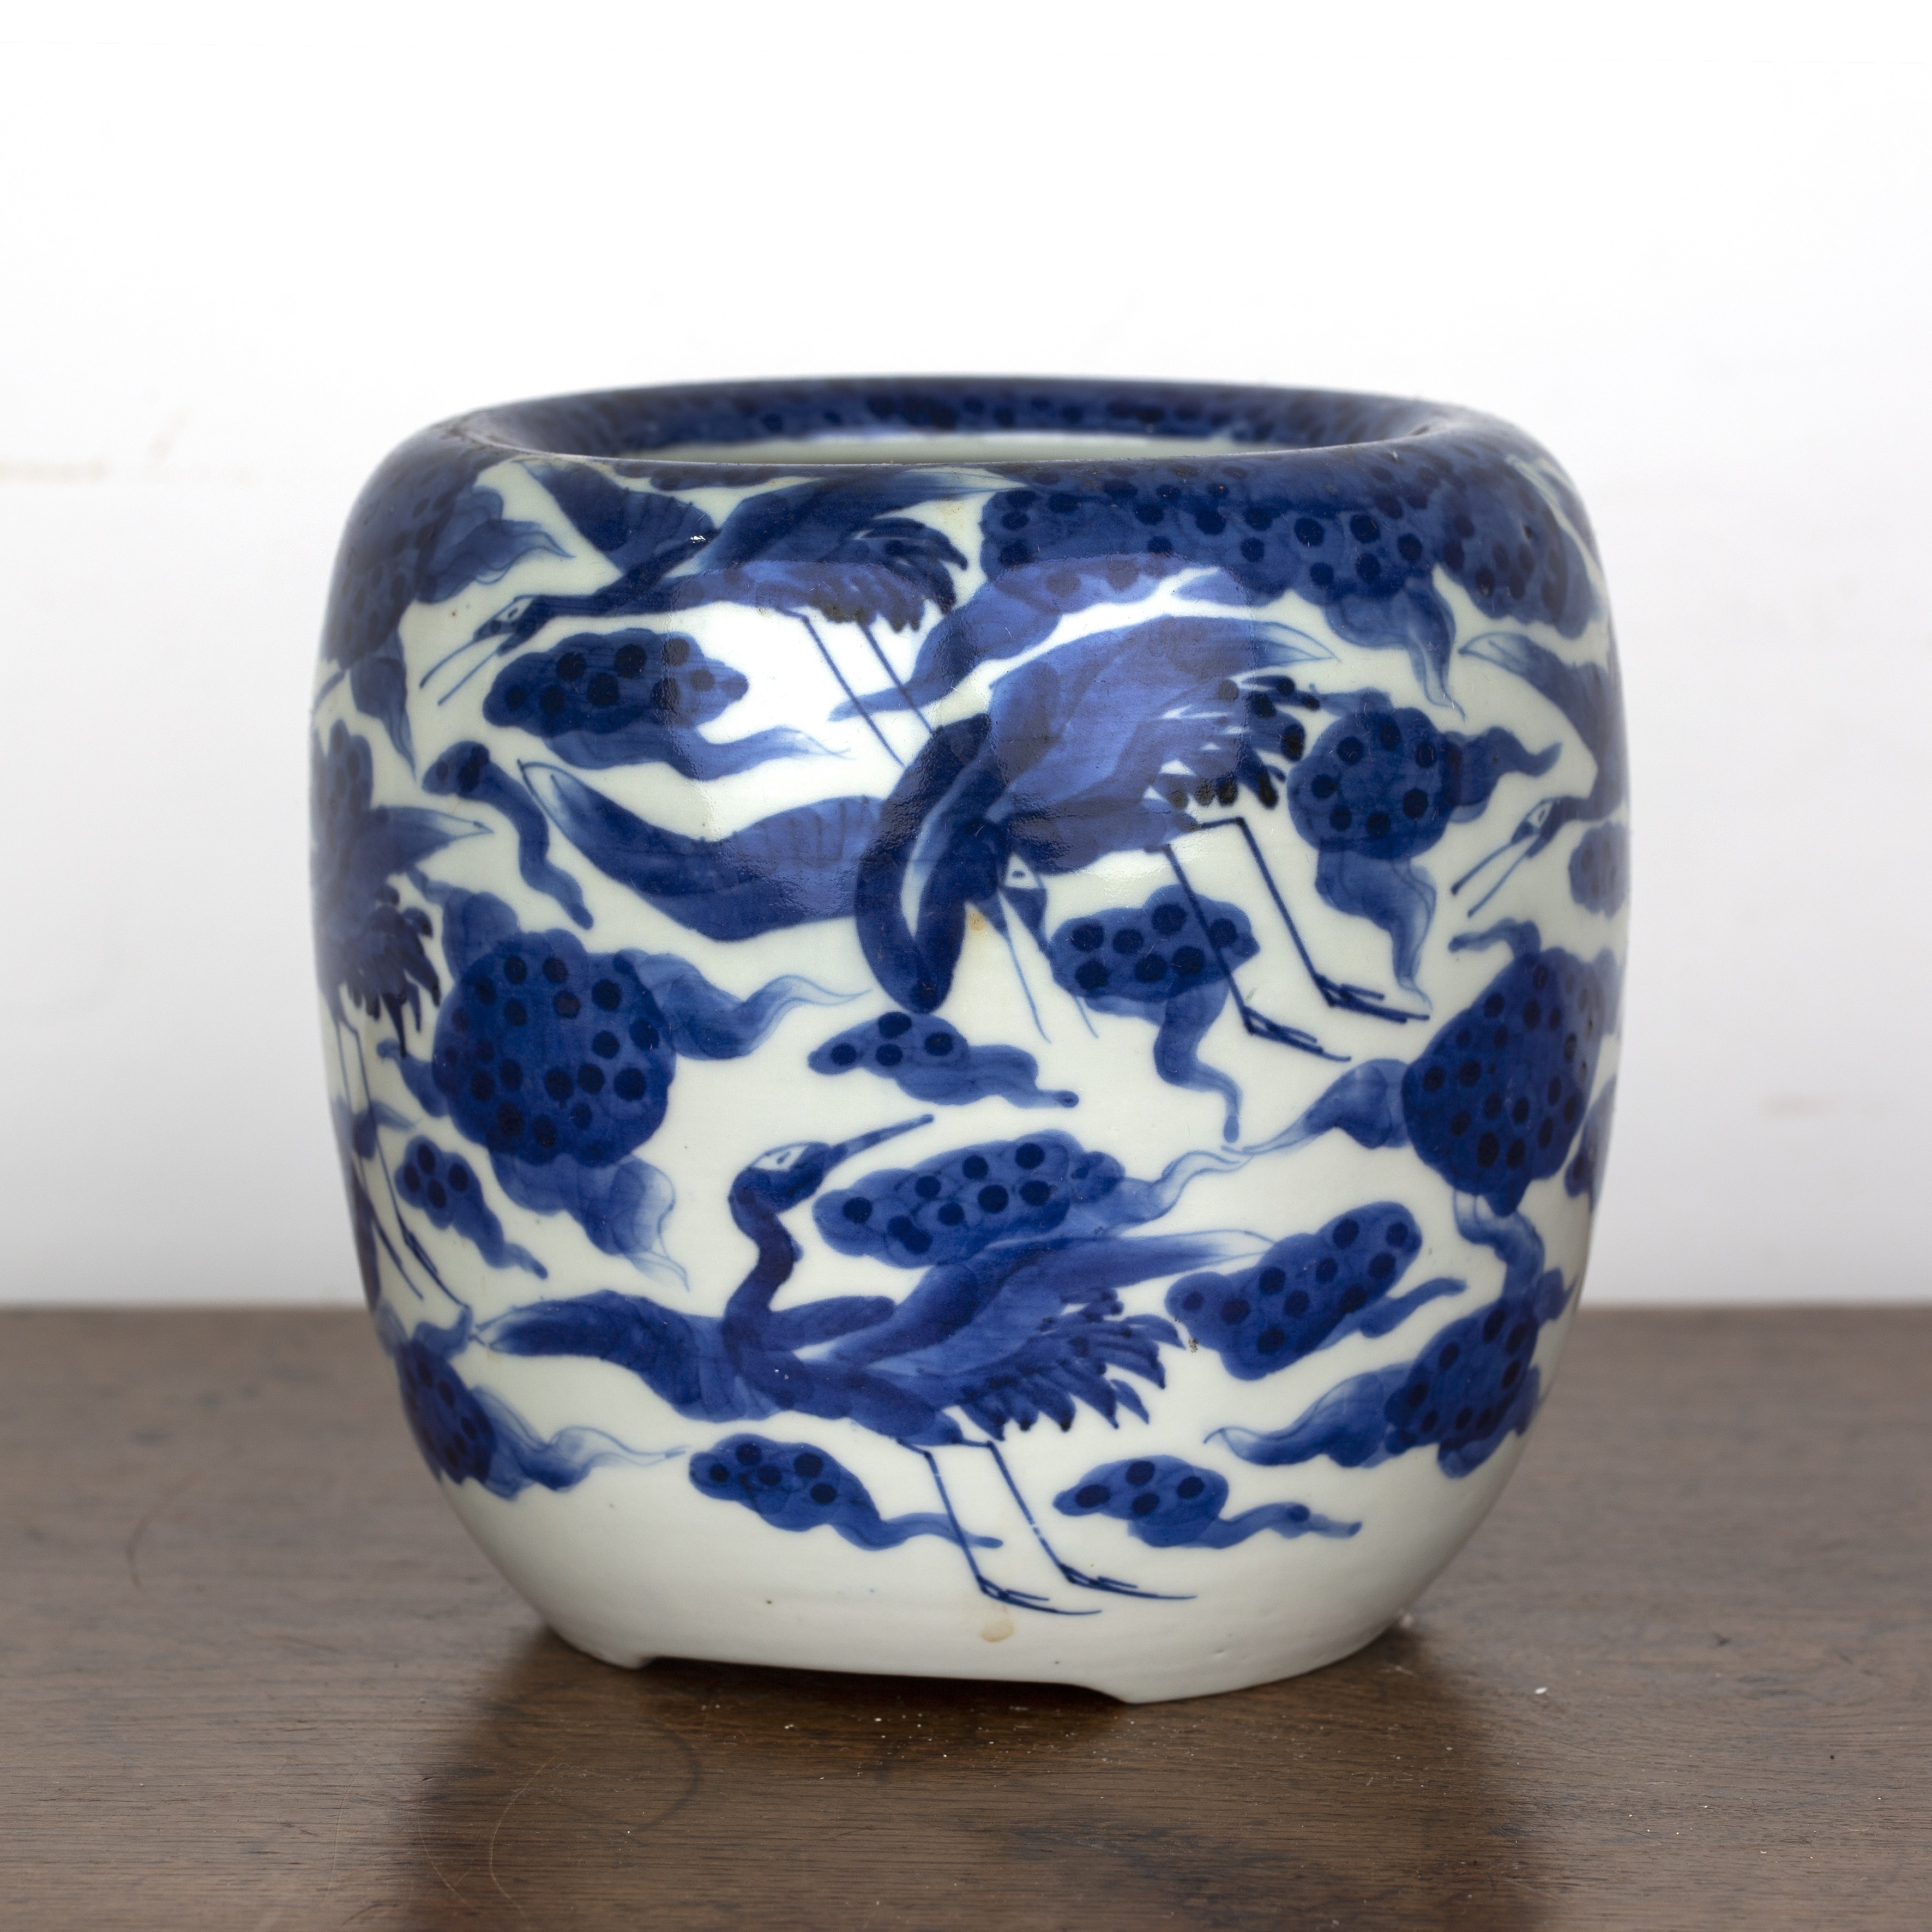 Blue and white porcelain jar Japanese painted with cranes in flight, 16.5cm high x 16.5cm diameter - Image 2 of 4